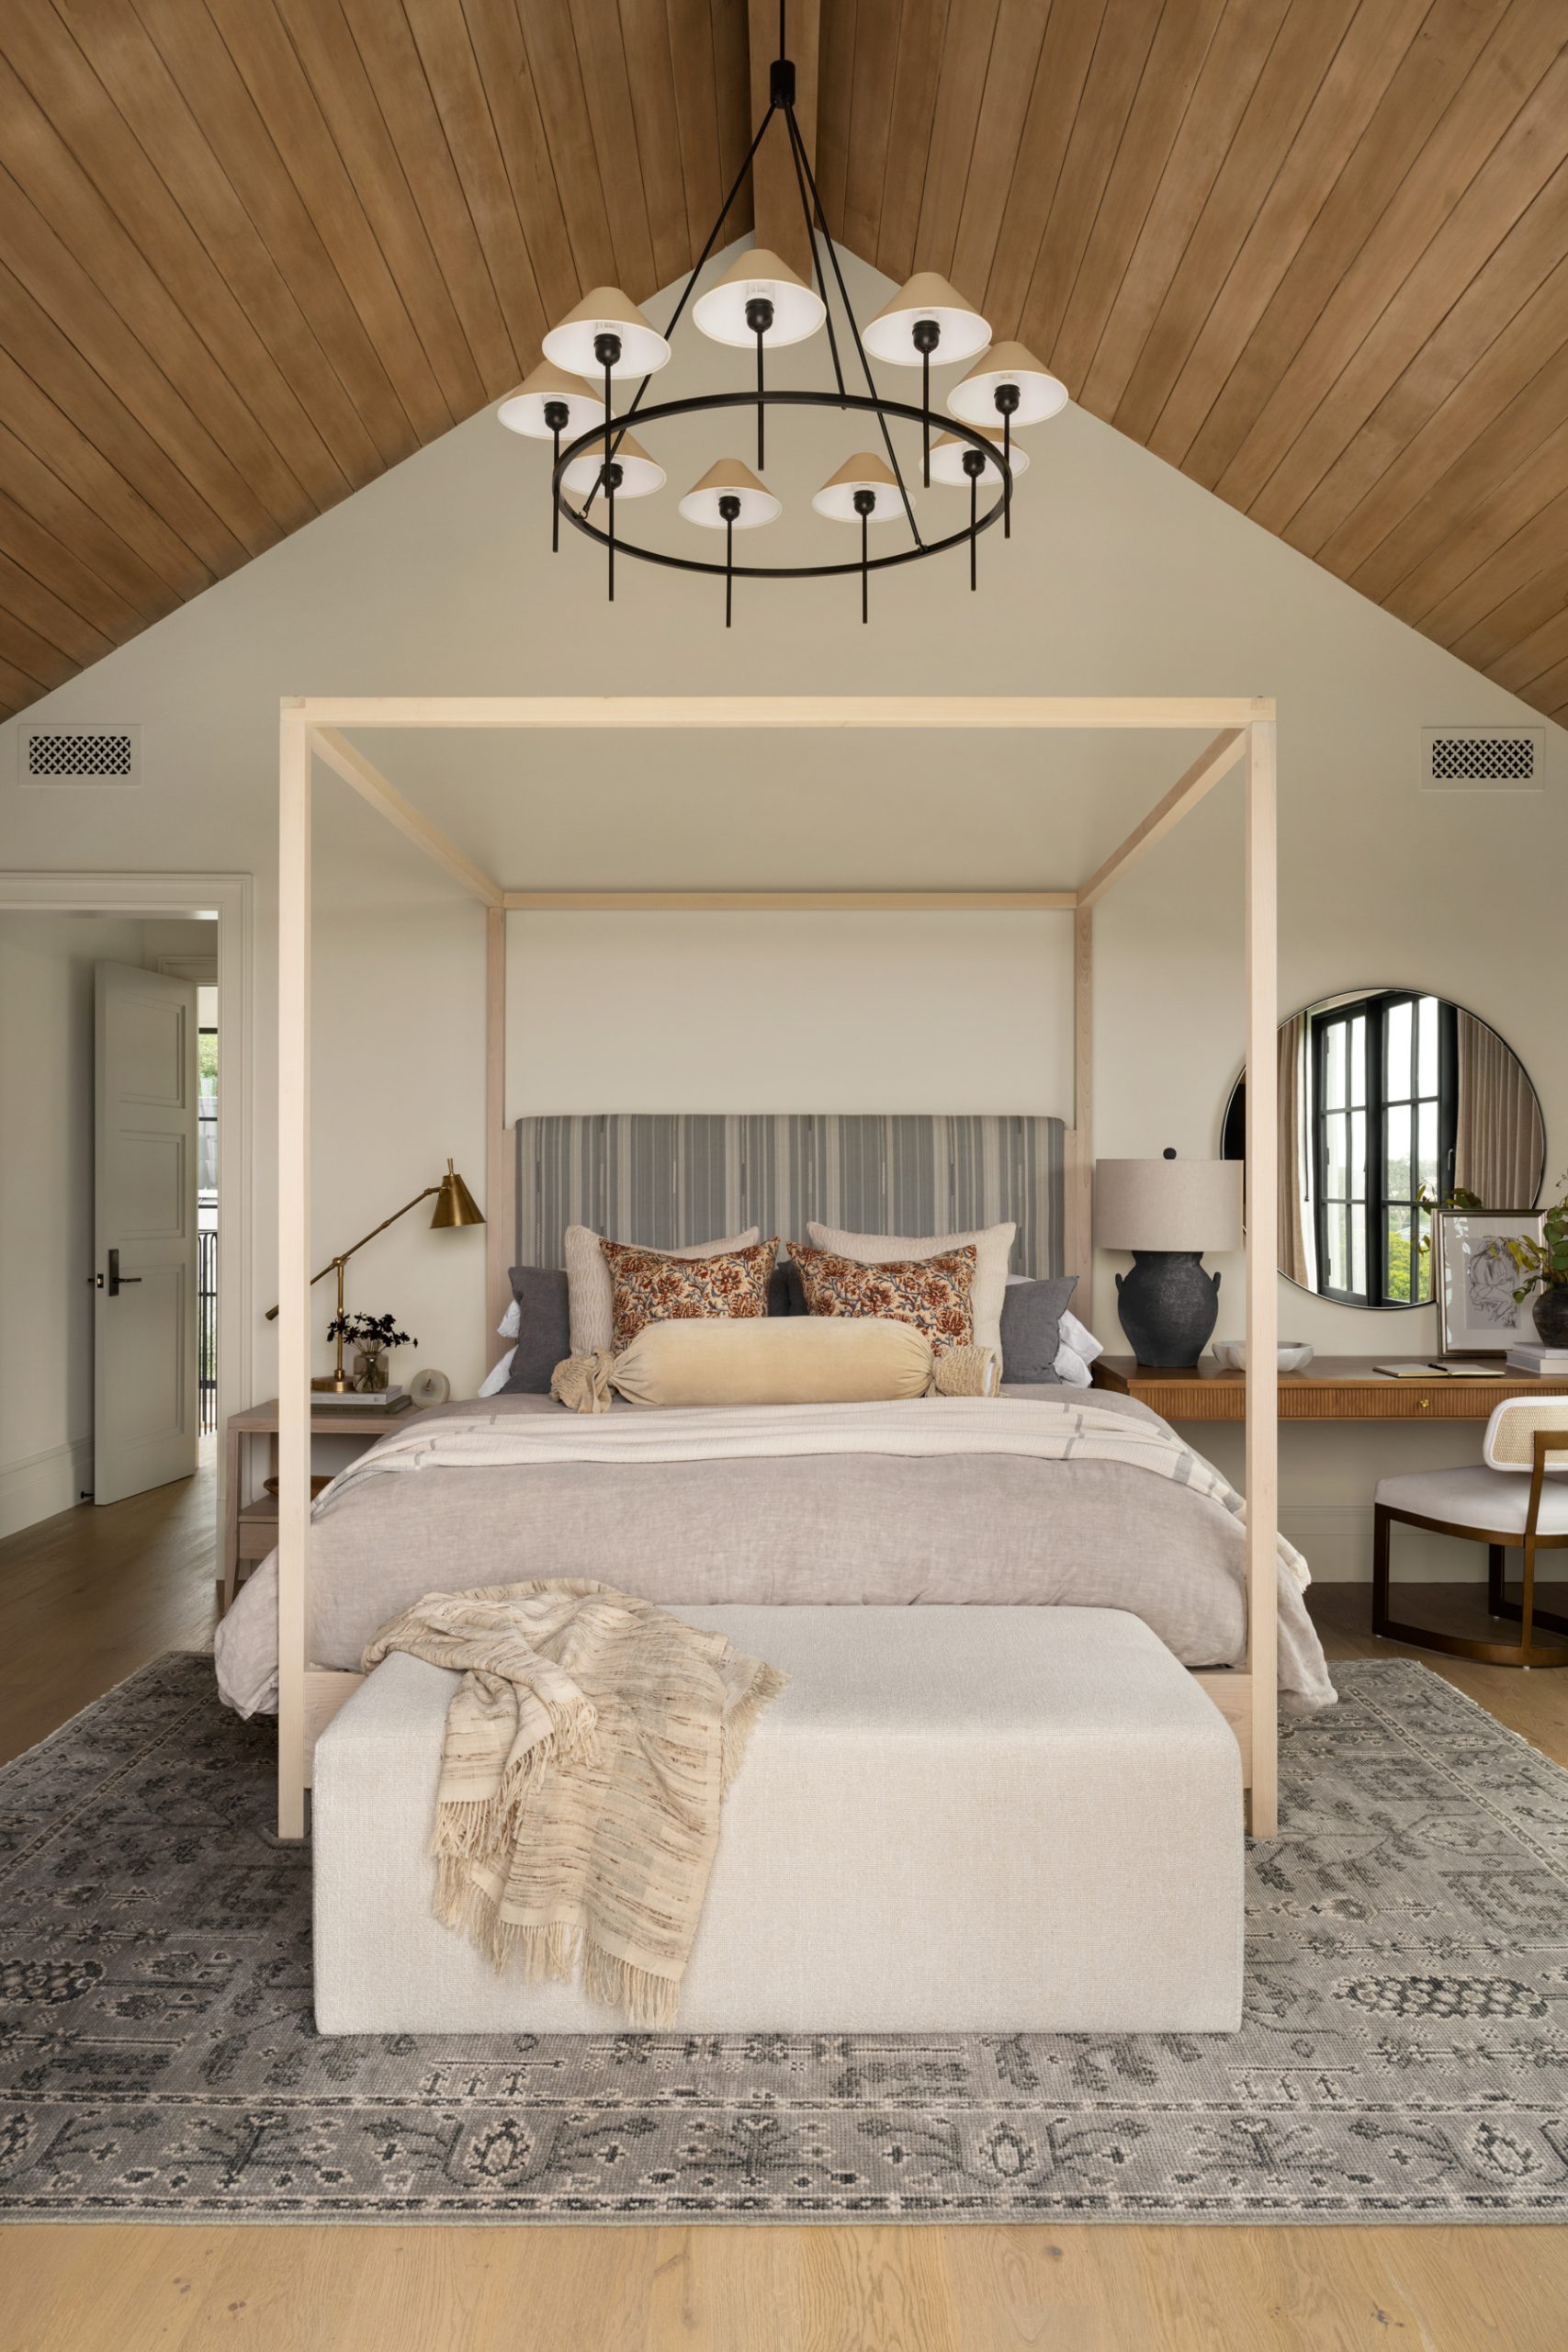 canopy bed with bench at end of bed and circular light fixture